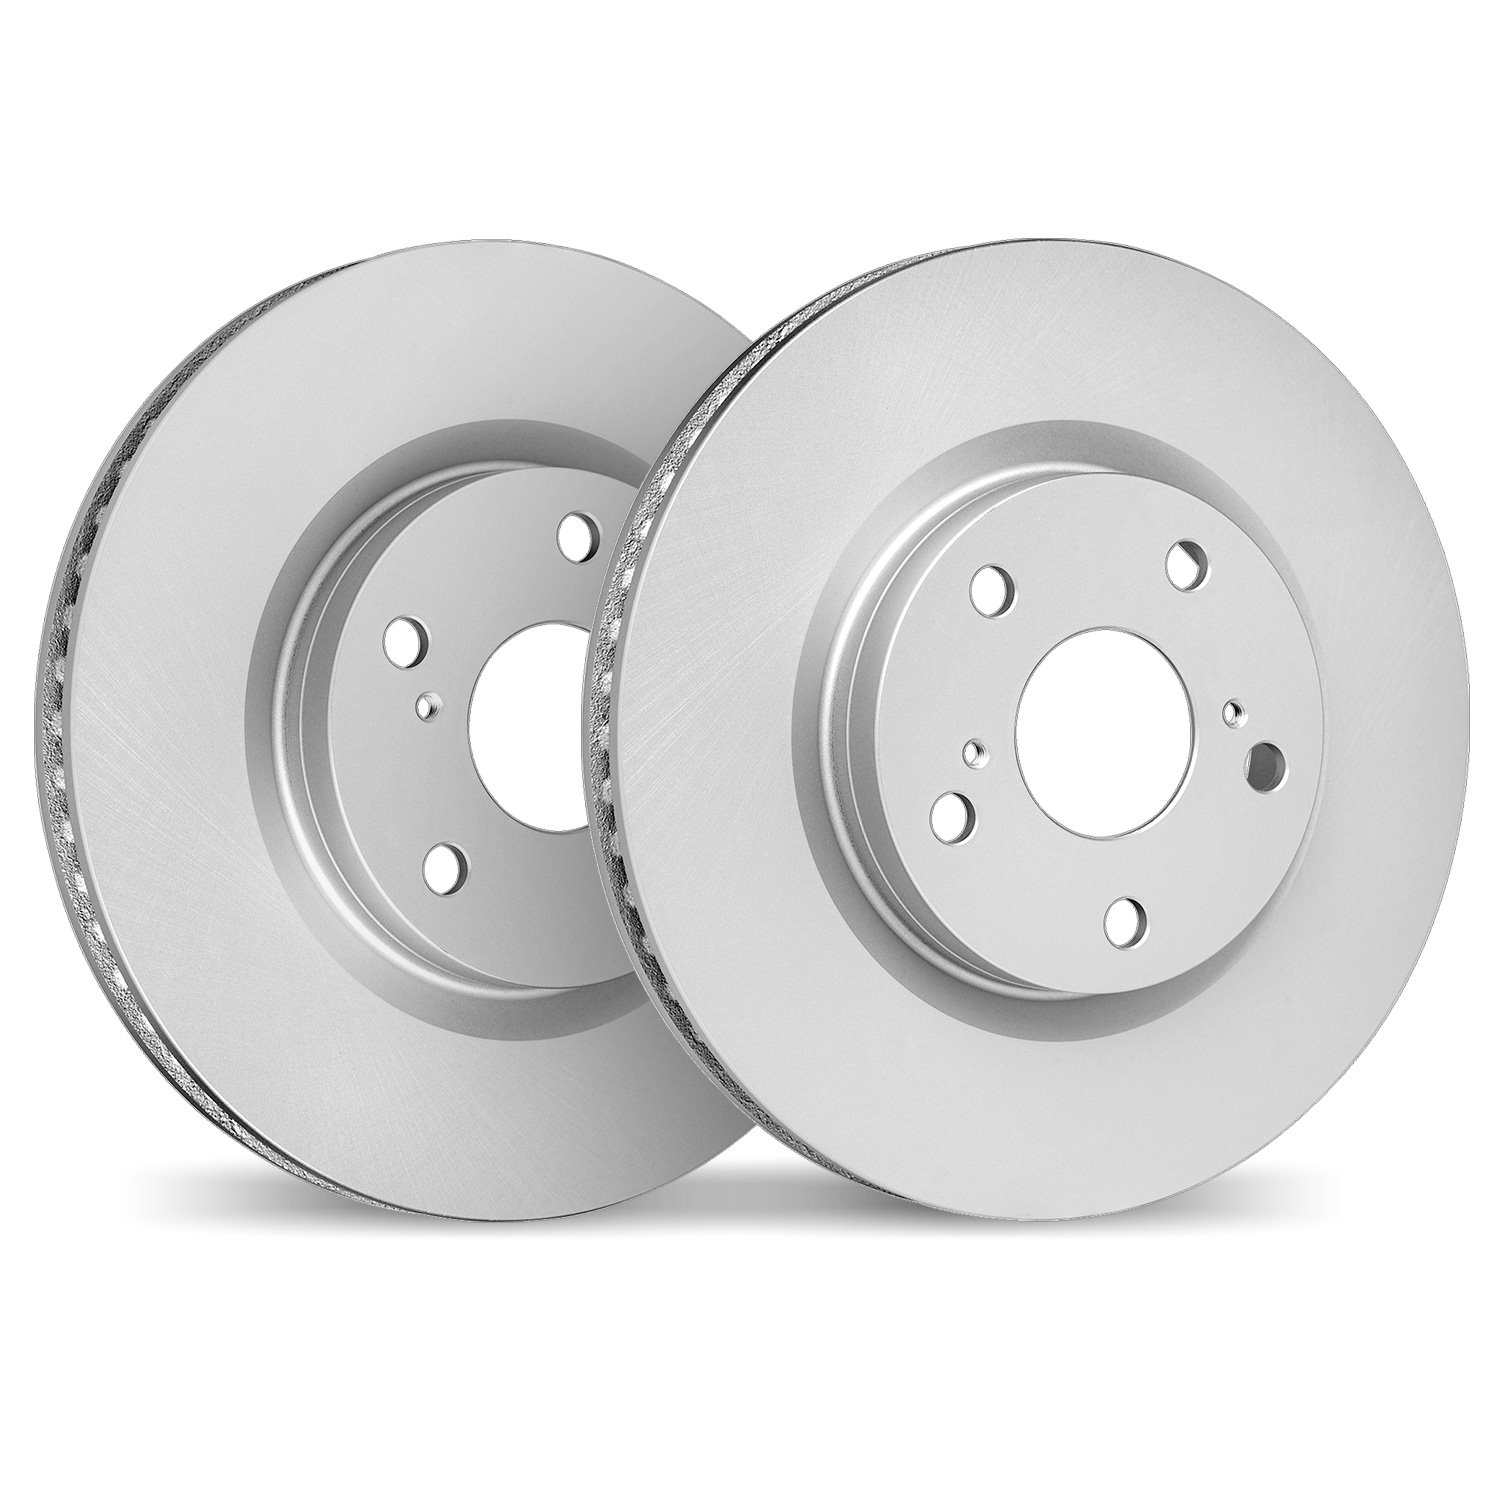 4002-11036 Geospec Brake Rotors, Fits Select Land Rover, Position: Rear